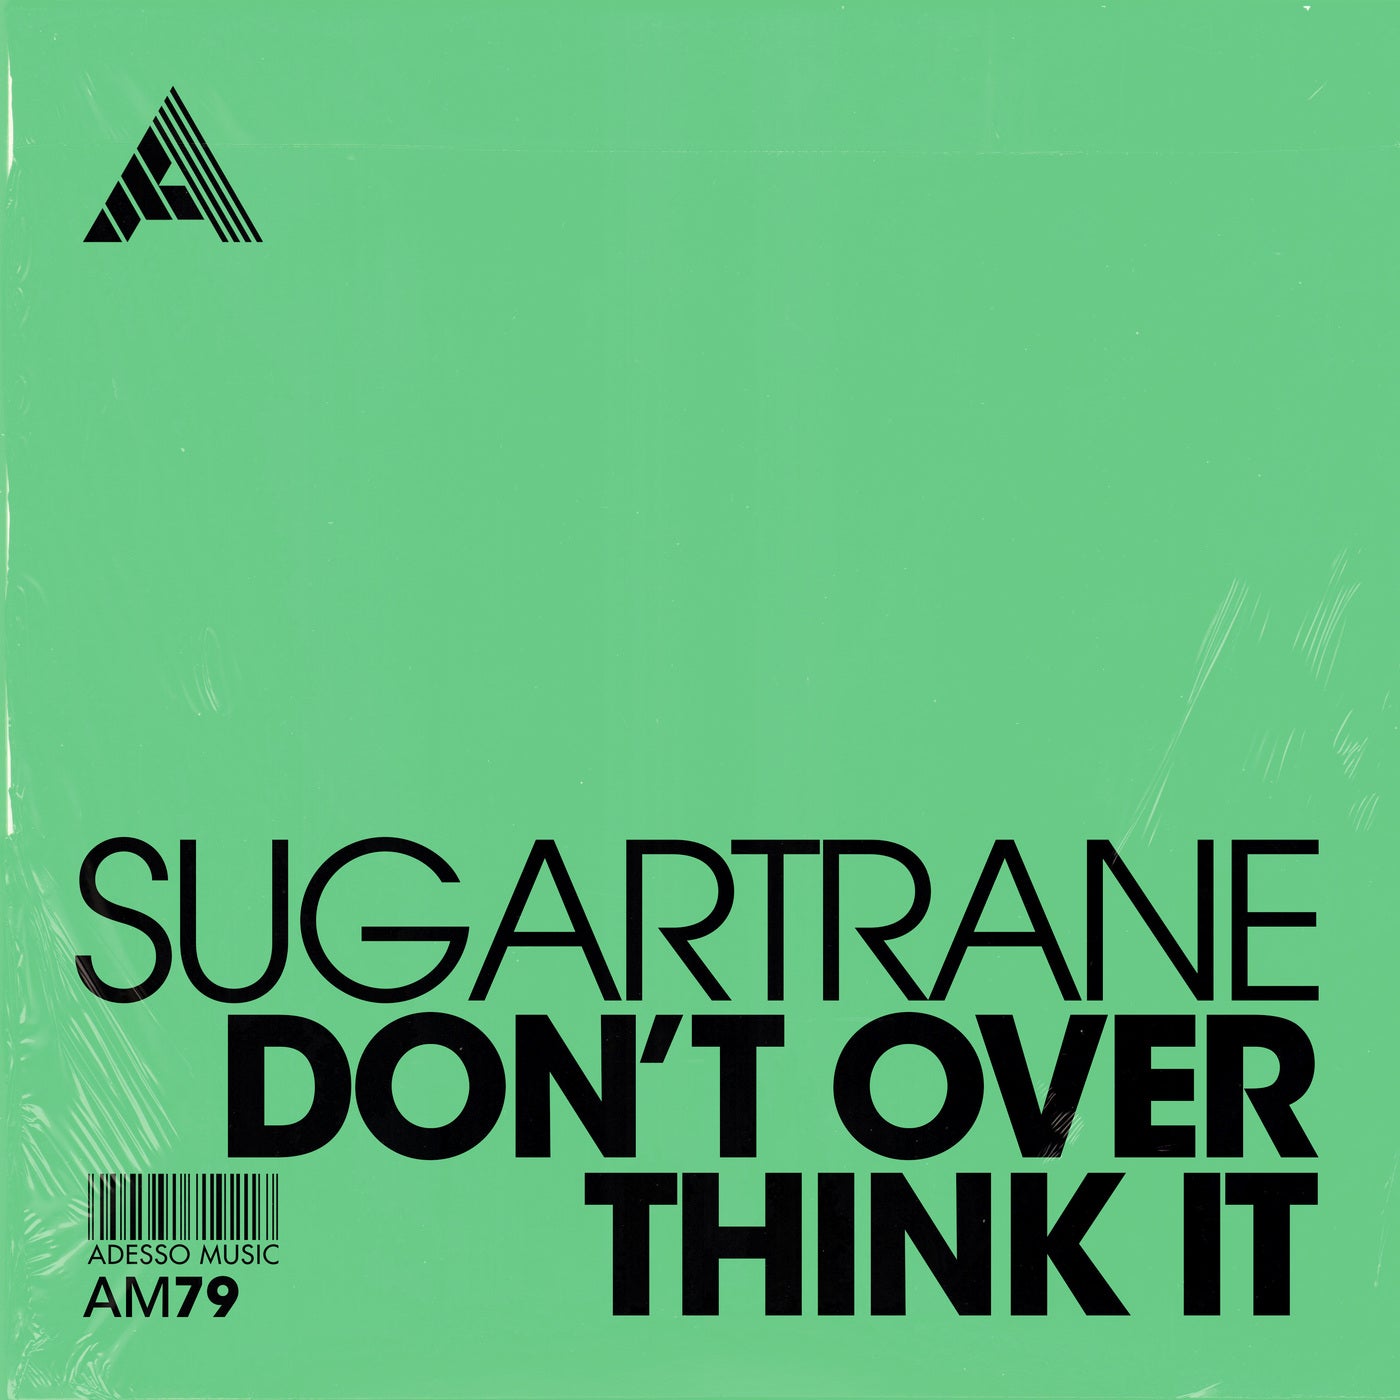 image cover: Sugartrane - Don't Over Think It on Adesso Music